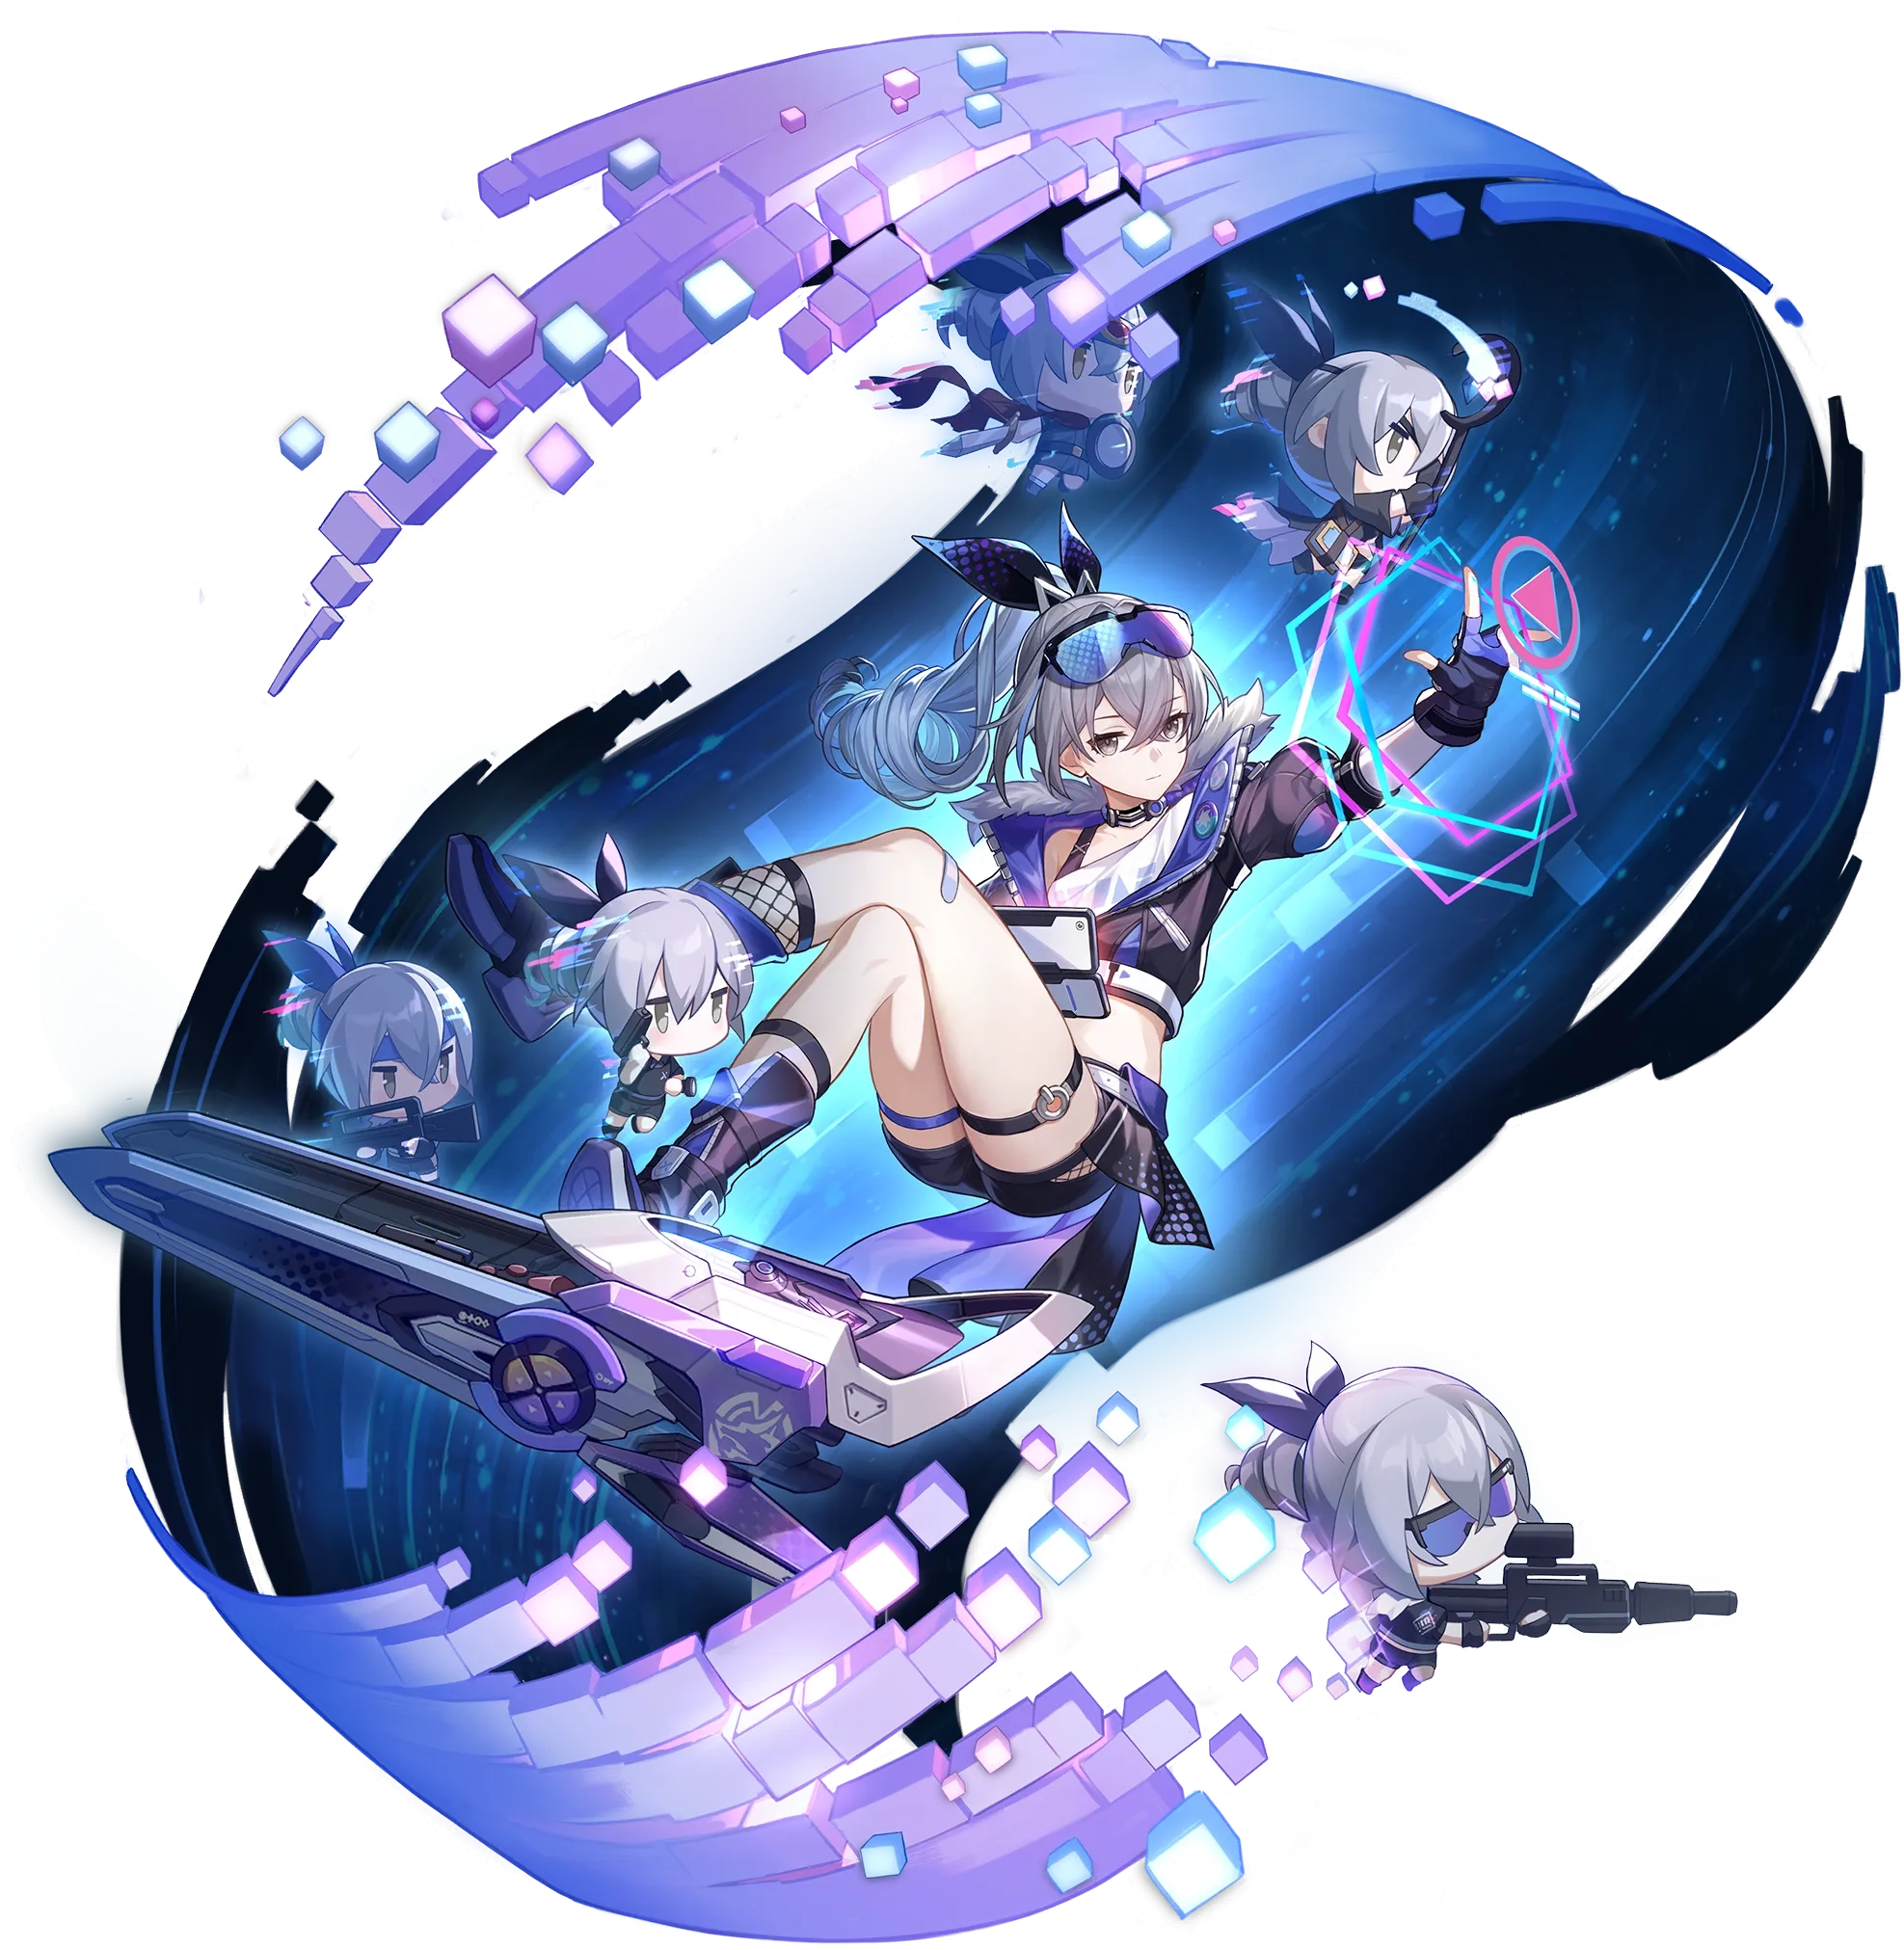 Honkai: Star Rail 1.1 Leaks - Which New Characters Are Playable